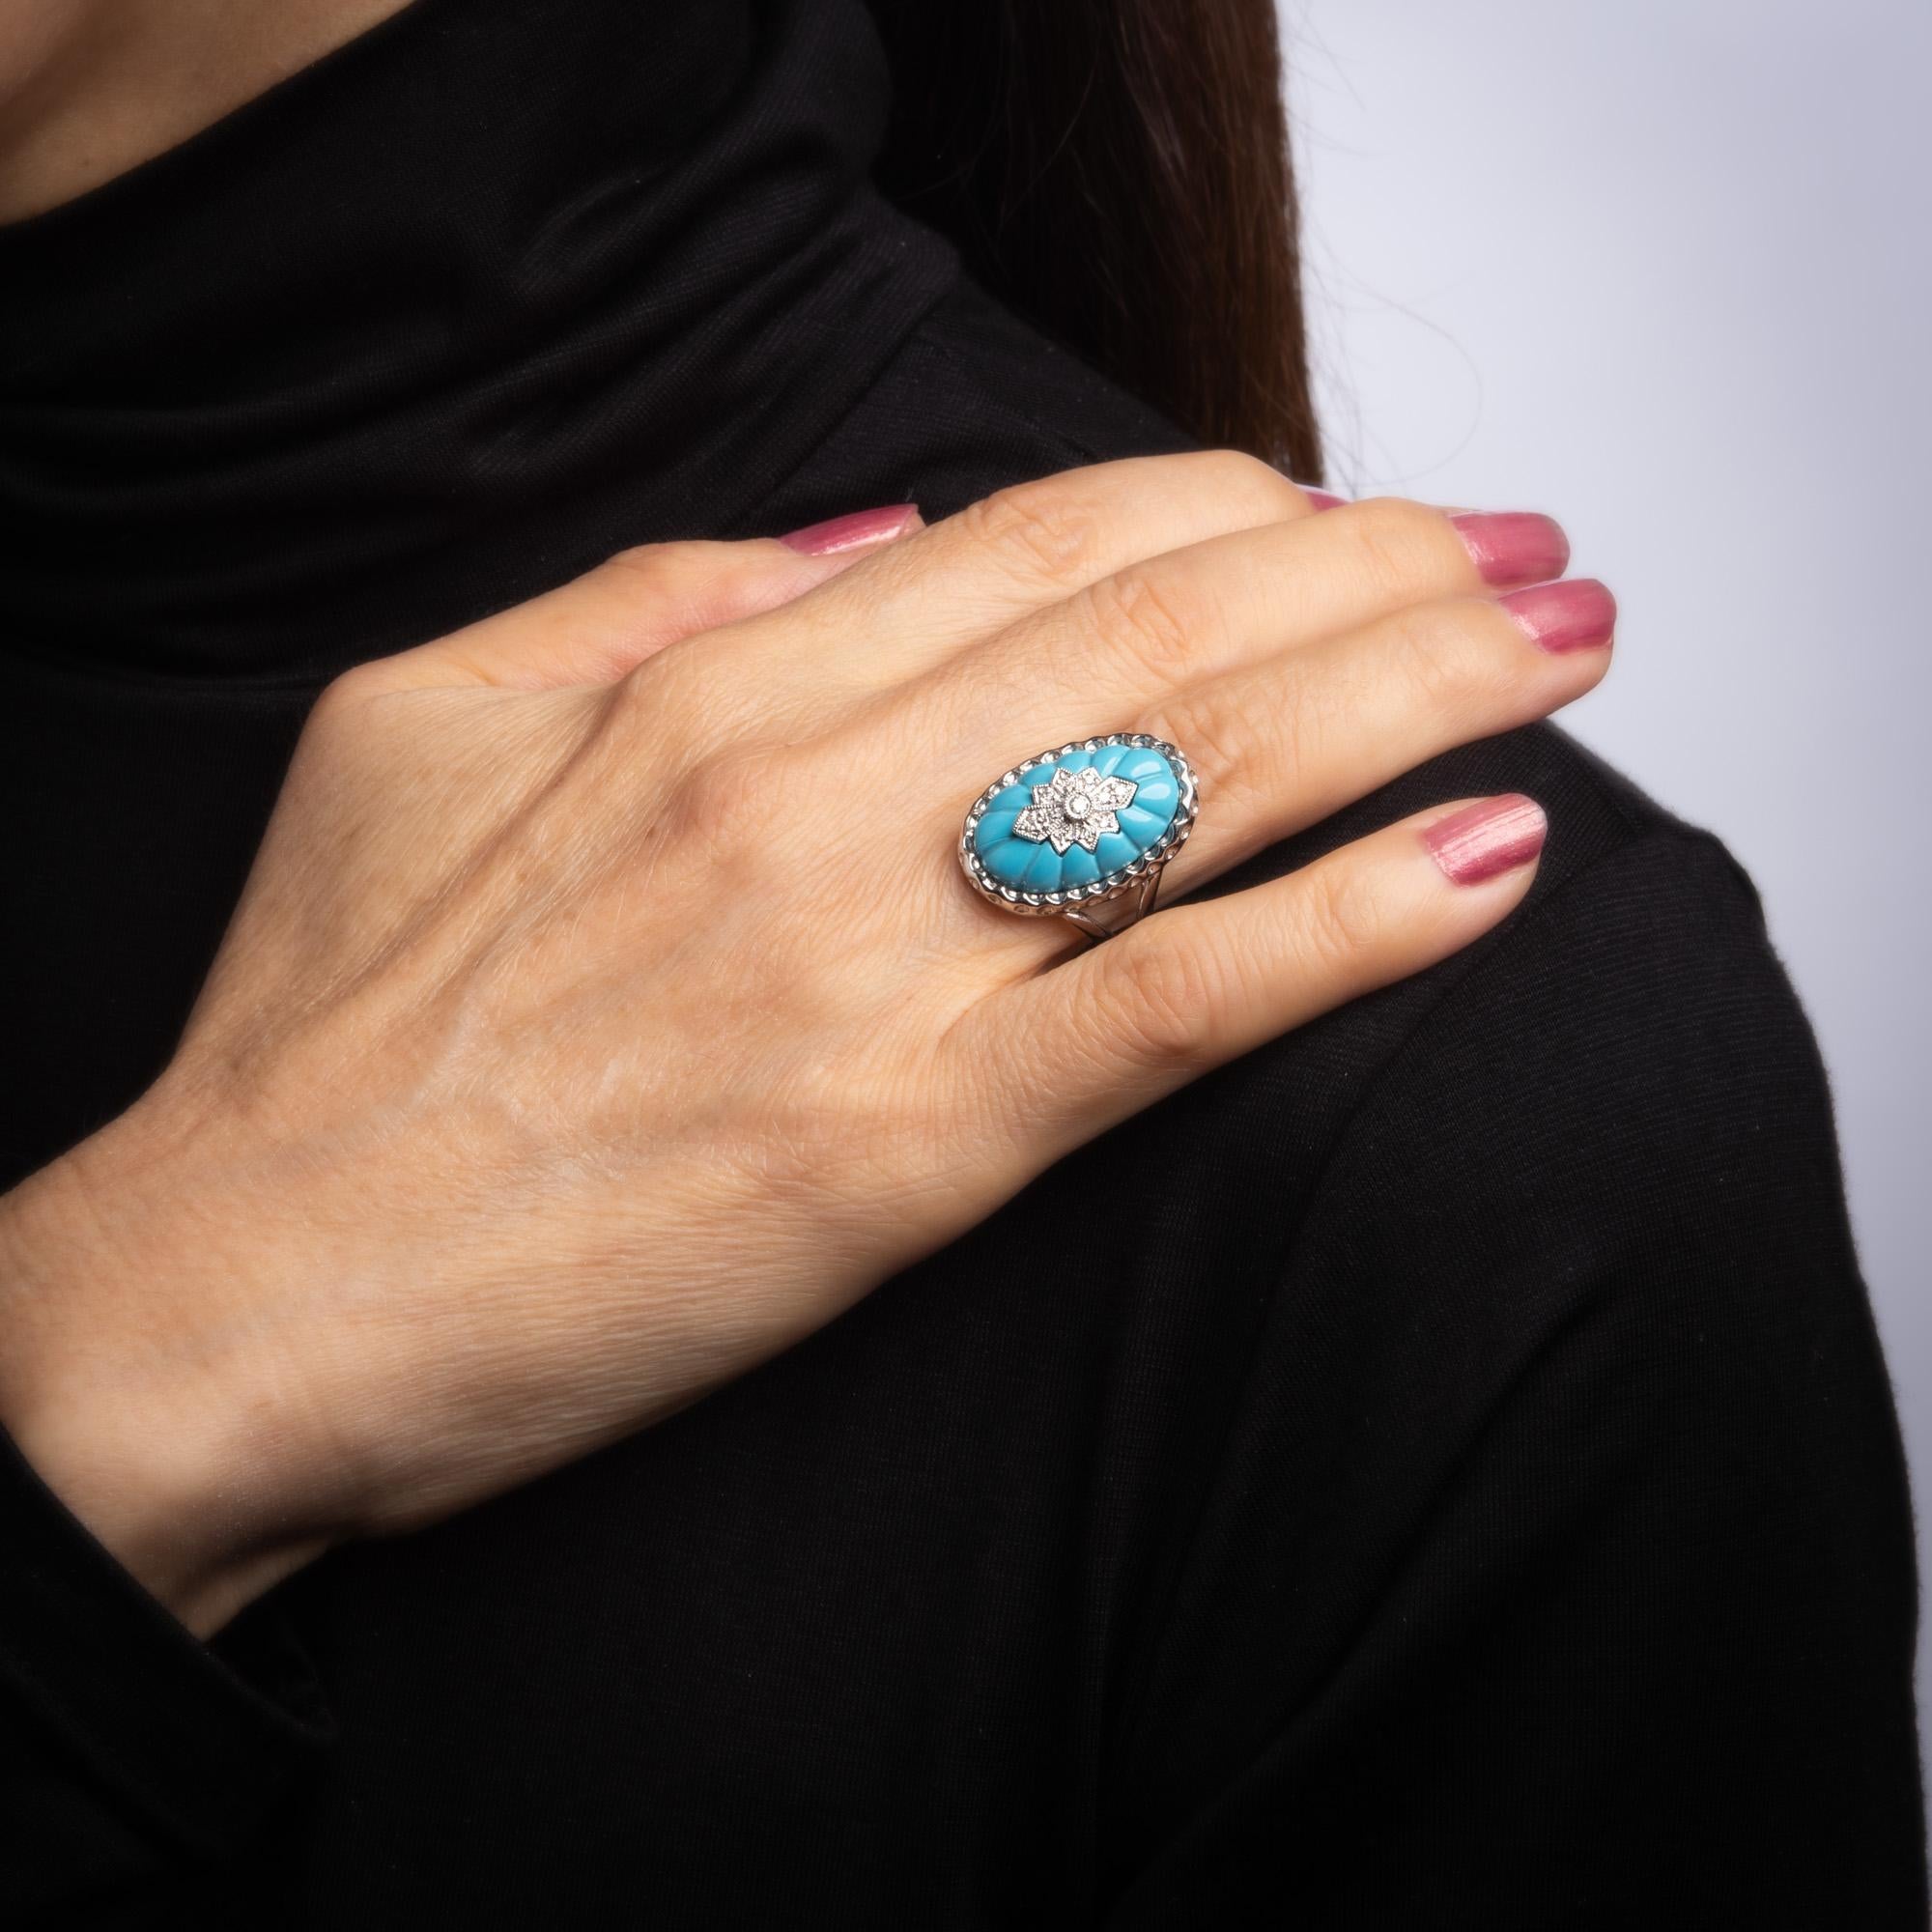 Women's Fluted Turquoise Diamond Oval Cocktail Ring Vintage 14 Karat Gold Fine Jewelry